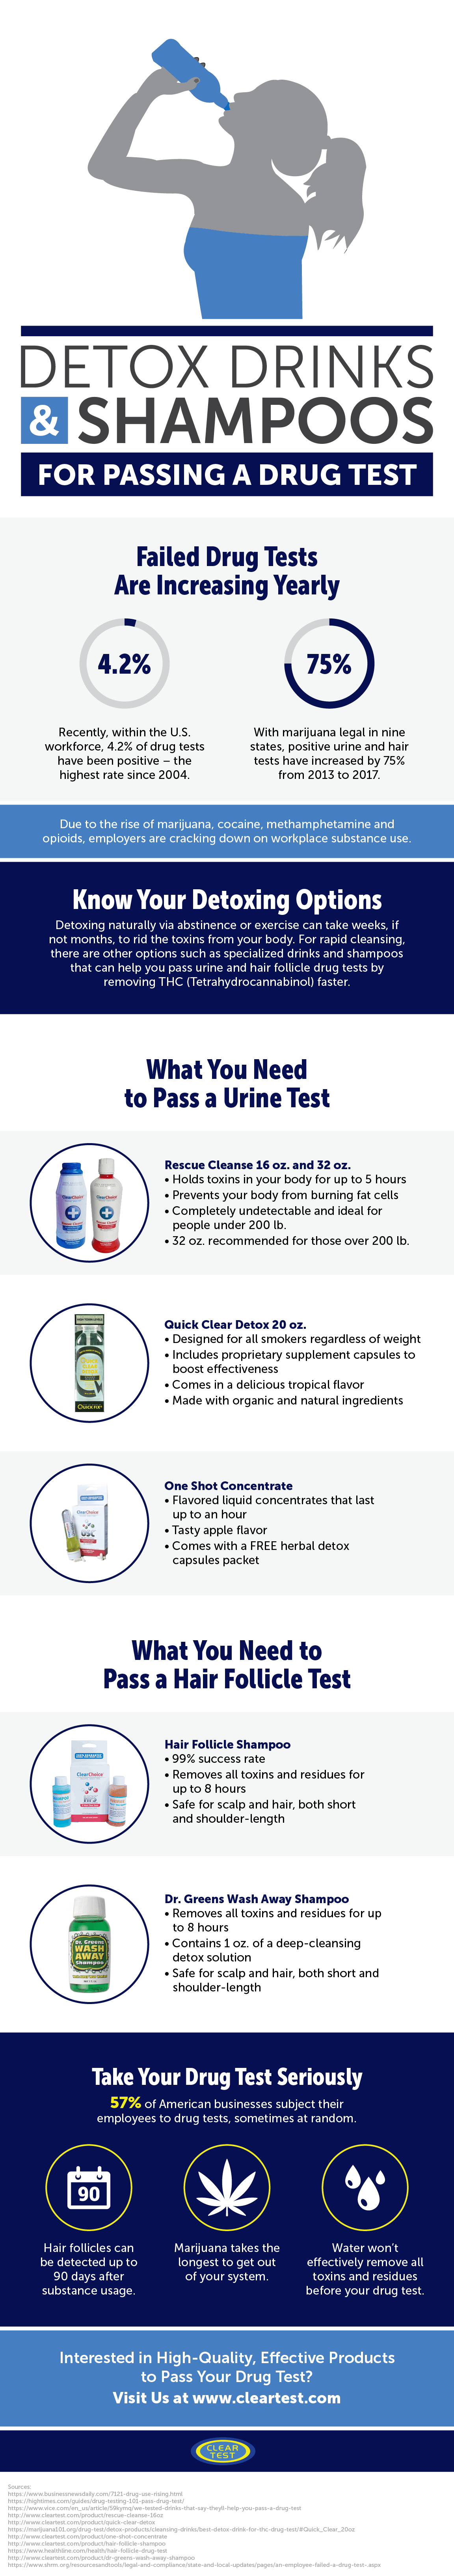 Detox Drinks and Shampoos for Passing a Drug Test Infographic